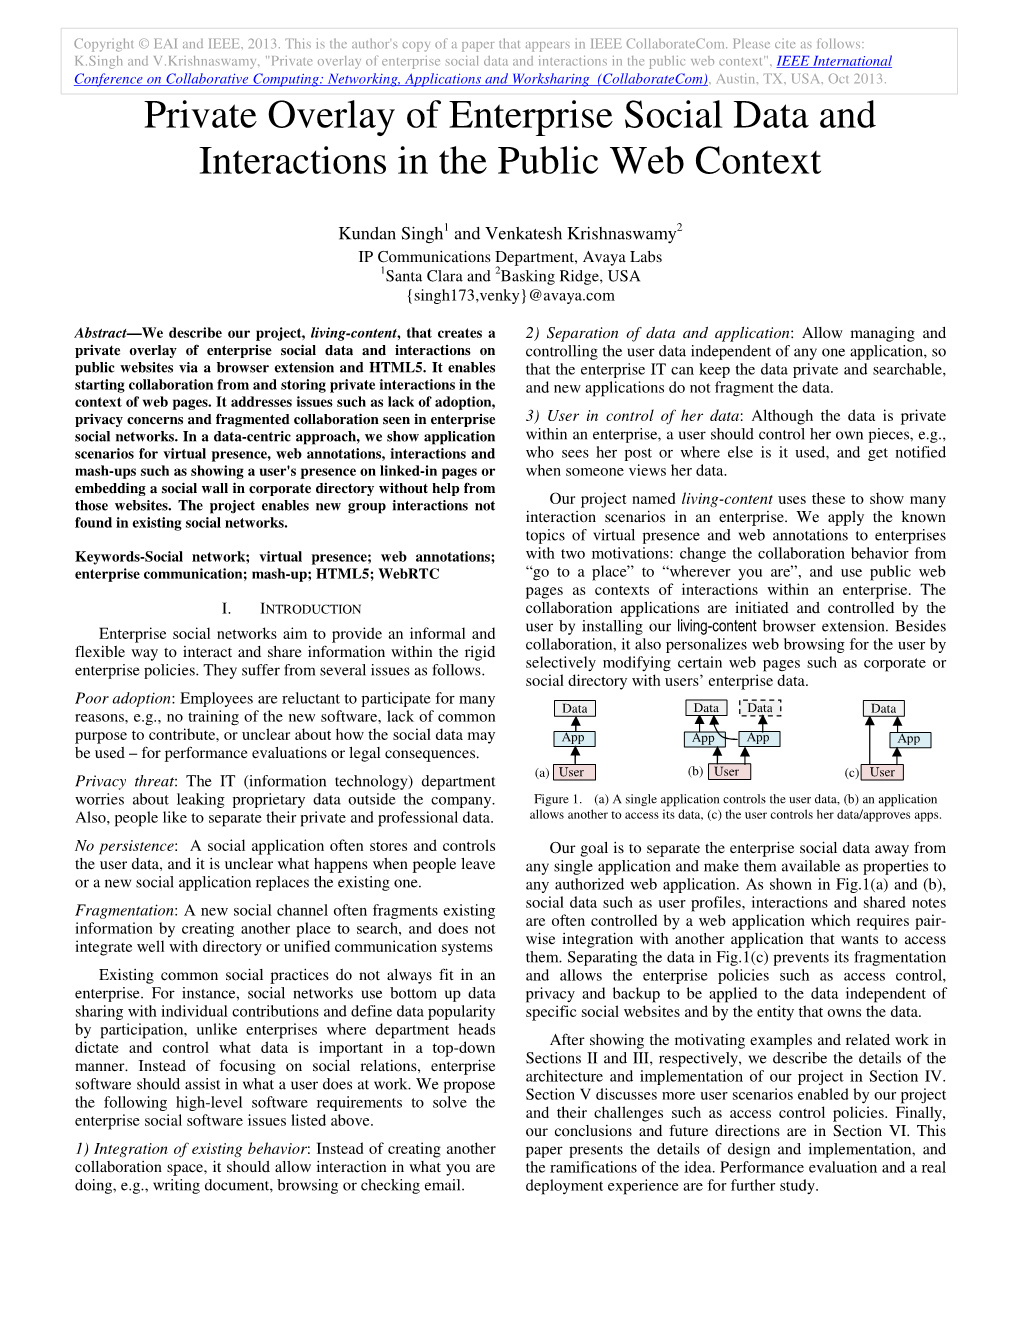 Private Overlay of Enterprise Social Data and Interactions in the Public Web Context